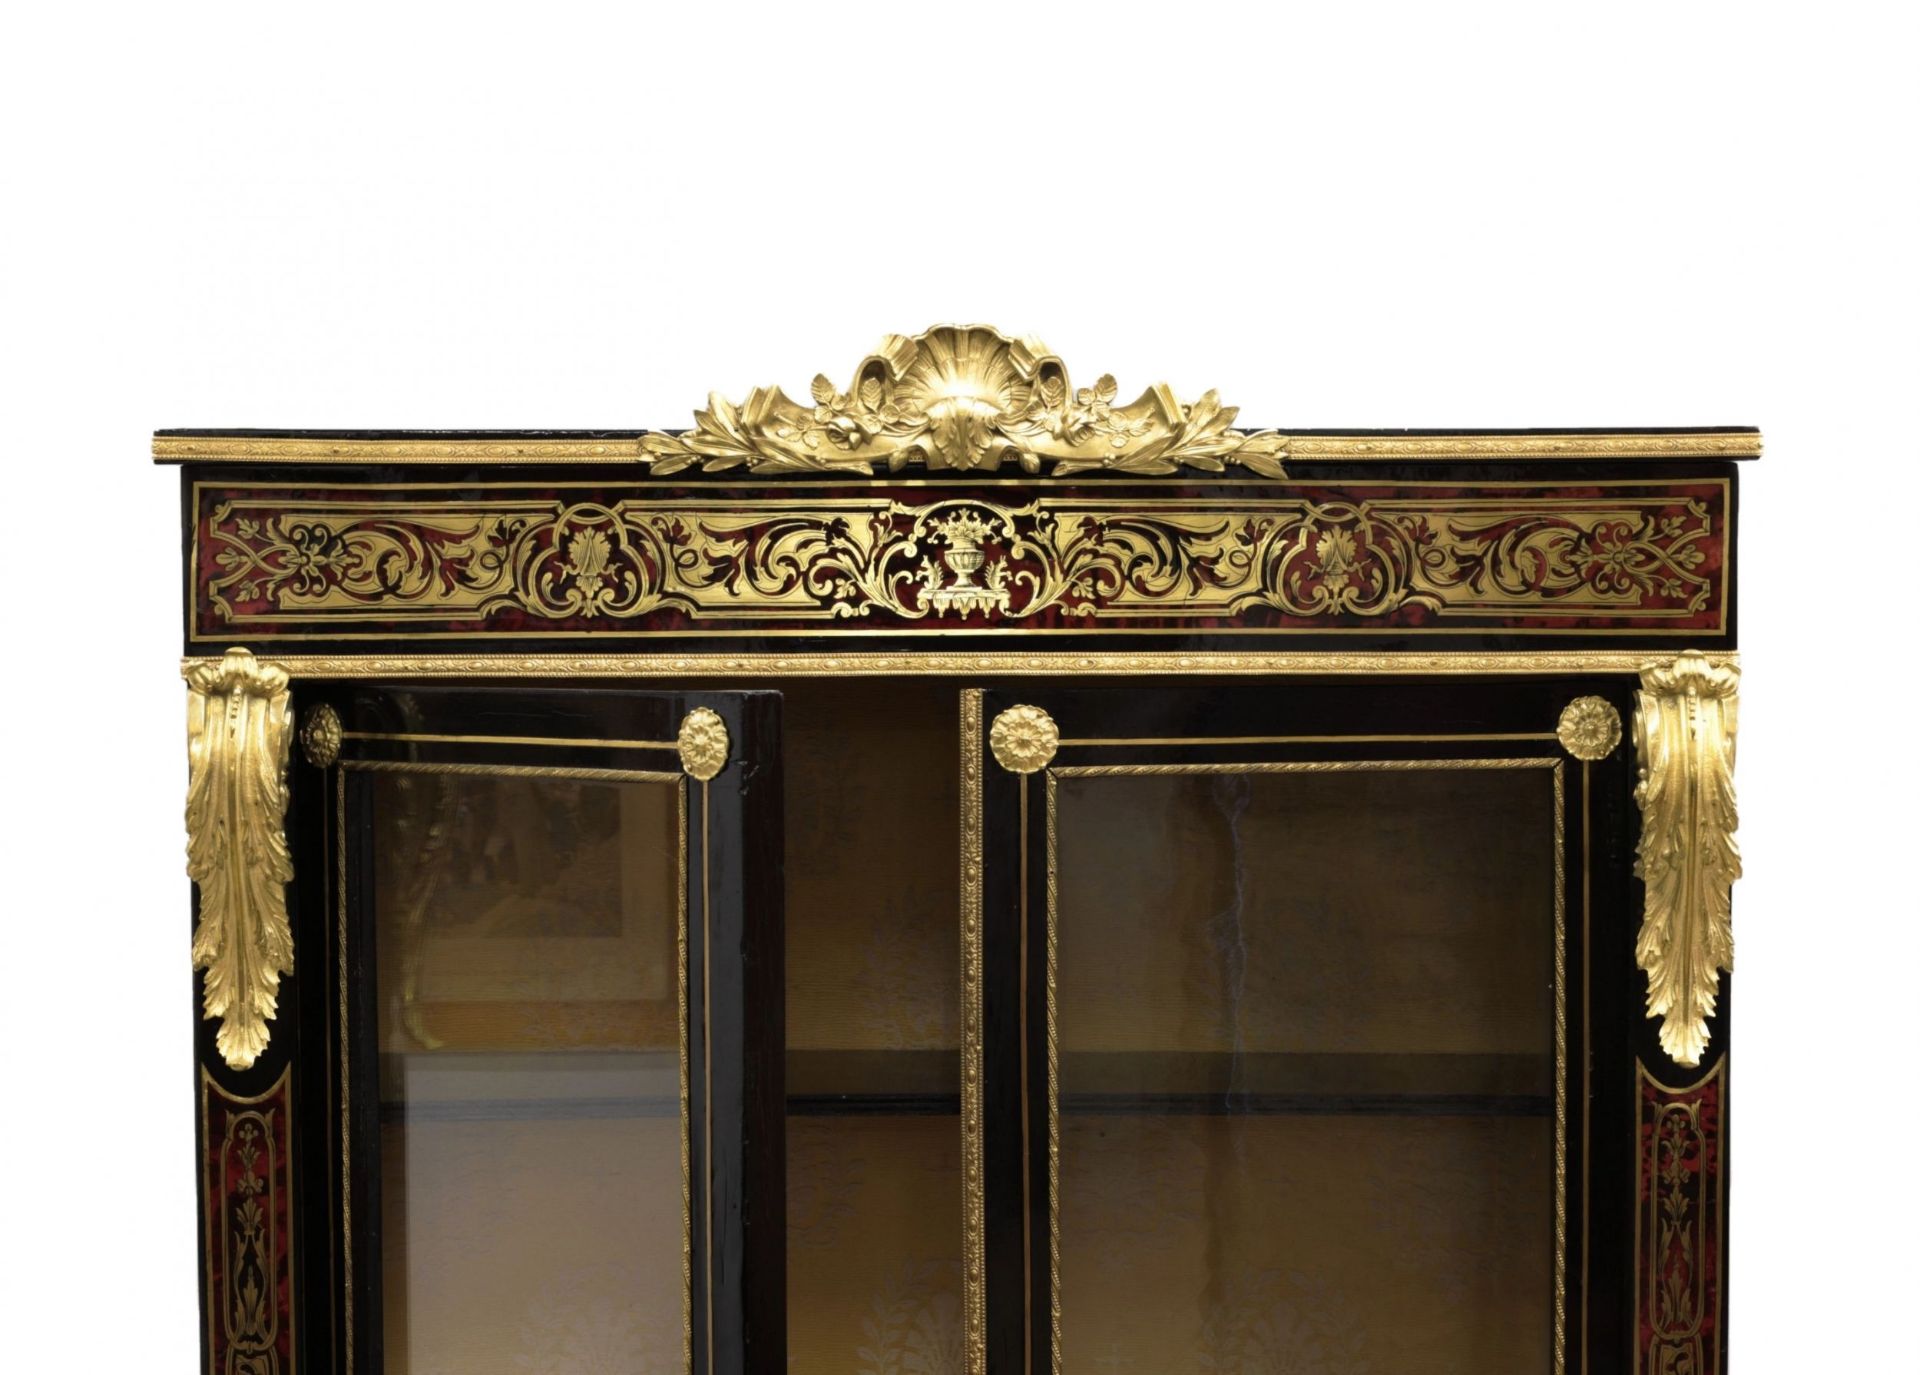 Showcase in Boulle style. 19th century. - Image 4 of 6